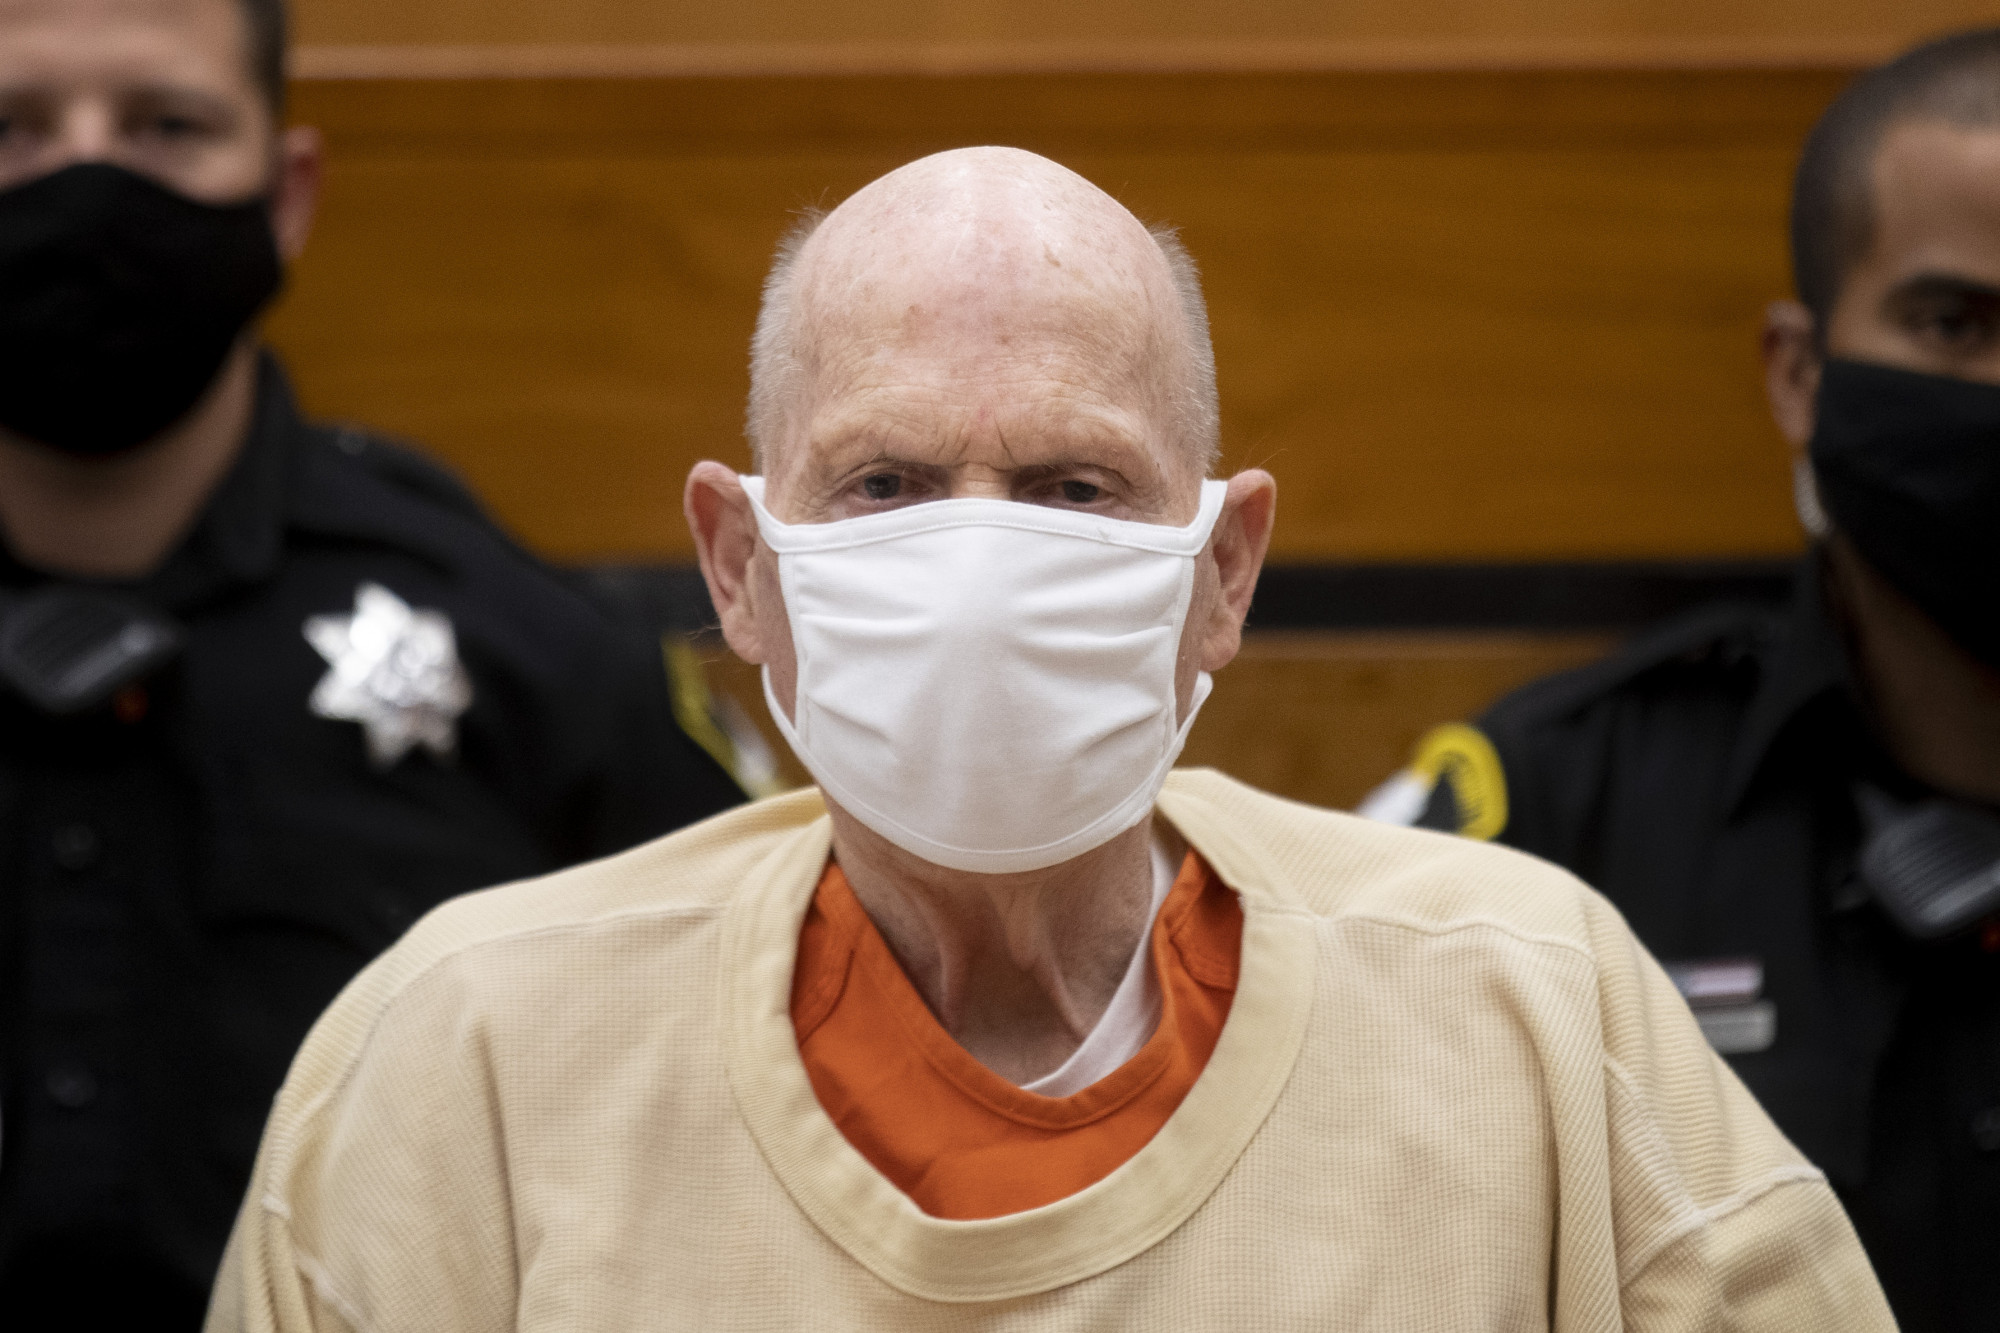 Victims Want Golden State Killer Sent to Toughest Prison